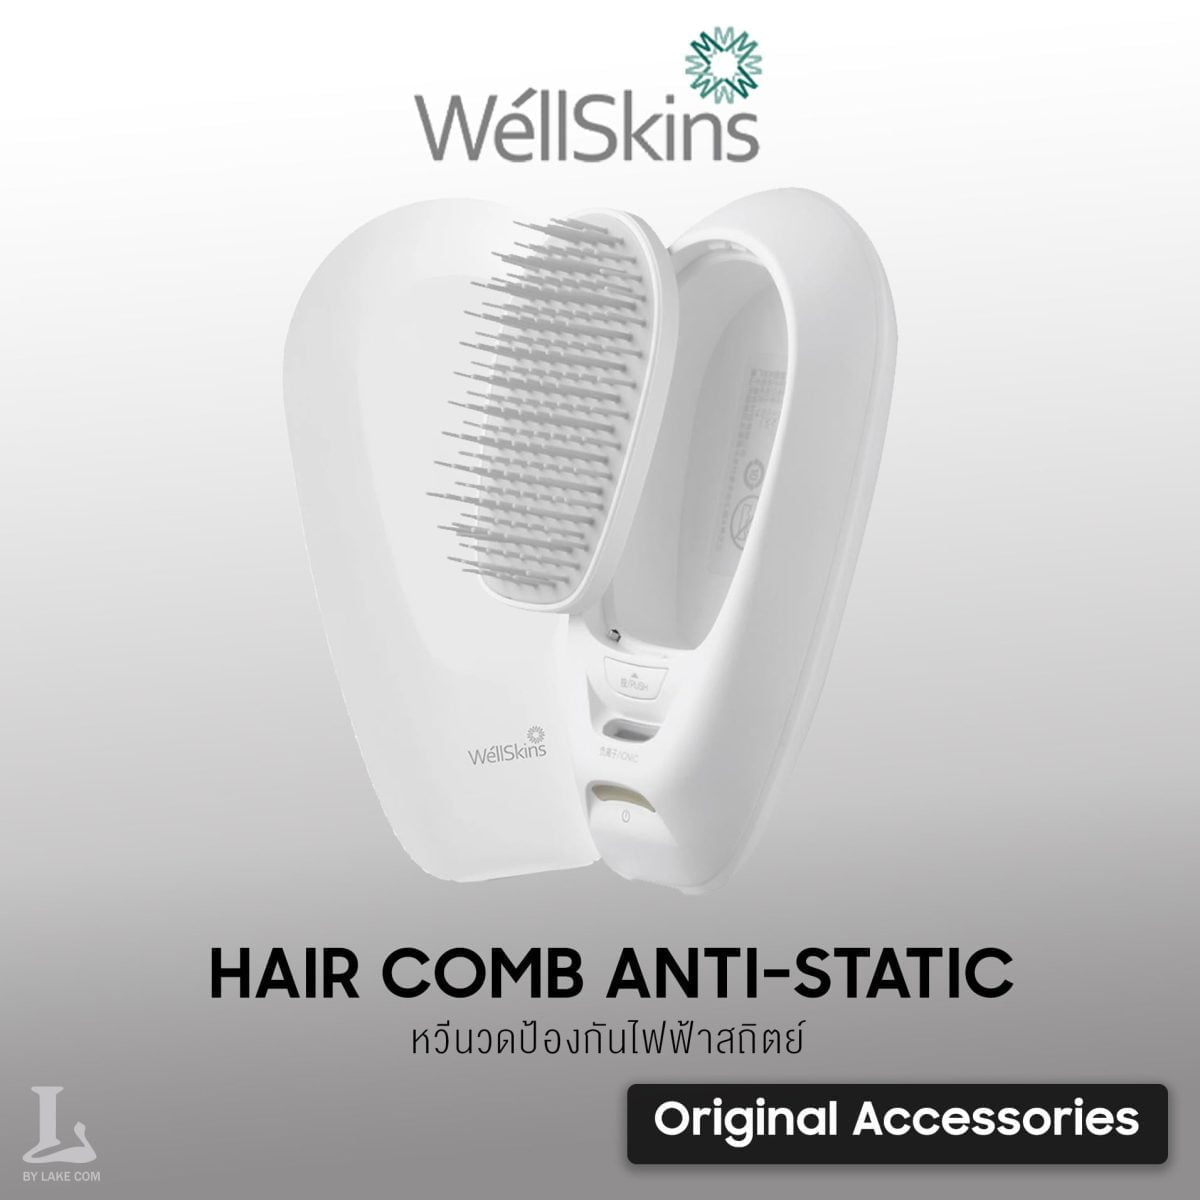 1 6 &Lt;H1&Gt;Wellskins Anion Hair Comb Anti-Static Hair Brush Massage Comb Salon Hair Styling Tool Portable Usb Rechargeable Head Spa Comb&Lt;/H1&Gt; &Lt;Ul&Gt; &Lt;Li&Gt;Deep-Ionic Generator, Active Ion Lock New Technology.&Lt;/Li&Gt; &Lt;Li&Gt;Foldable Storage Design, Easy To Separate And Easy To Carry.&Lt;/Li&Gt; &Lt;Li&Gt;Wire System Upgrade Charging Type, Long Battery Life.&Lt;/Li&Gt; &Lt;Li&Gt;Automatically Power Off After Charging/Water Intake.&Lt;/Li&Gt; &Lt;Li&Gt;Ergonomic And Comfortable Handle Feel.&Lt;/Li&Gt; &Lt;/Ul&Gt; &Lt;H3&Gt;Specification:&Lt;/H3&Gt; Brand: Wellskins Type: Wx-Fz200 Color: White Rated Voltage: Dc3.7V Rated Current: 1A Rated Power: 0.3W Weight &Amp; Size: Product Weight: 0.27Kg Package Weight: 0.38Kg Product Size(L X W X H): 6.45 X 2.8 X 12.58Cm Package Size(L X W X H): 7.5 X 4.2 X 14.2Cm &Lt;H3&Gt;Package Contents:&Lt;/H3&Gt; 1 X Ion Comb 1 X Usb 1 X Bag 1 X User Manual Wellskins Wellskins Anion Hair Comb Anti-Static